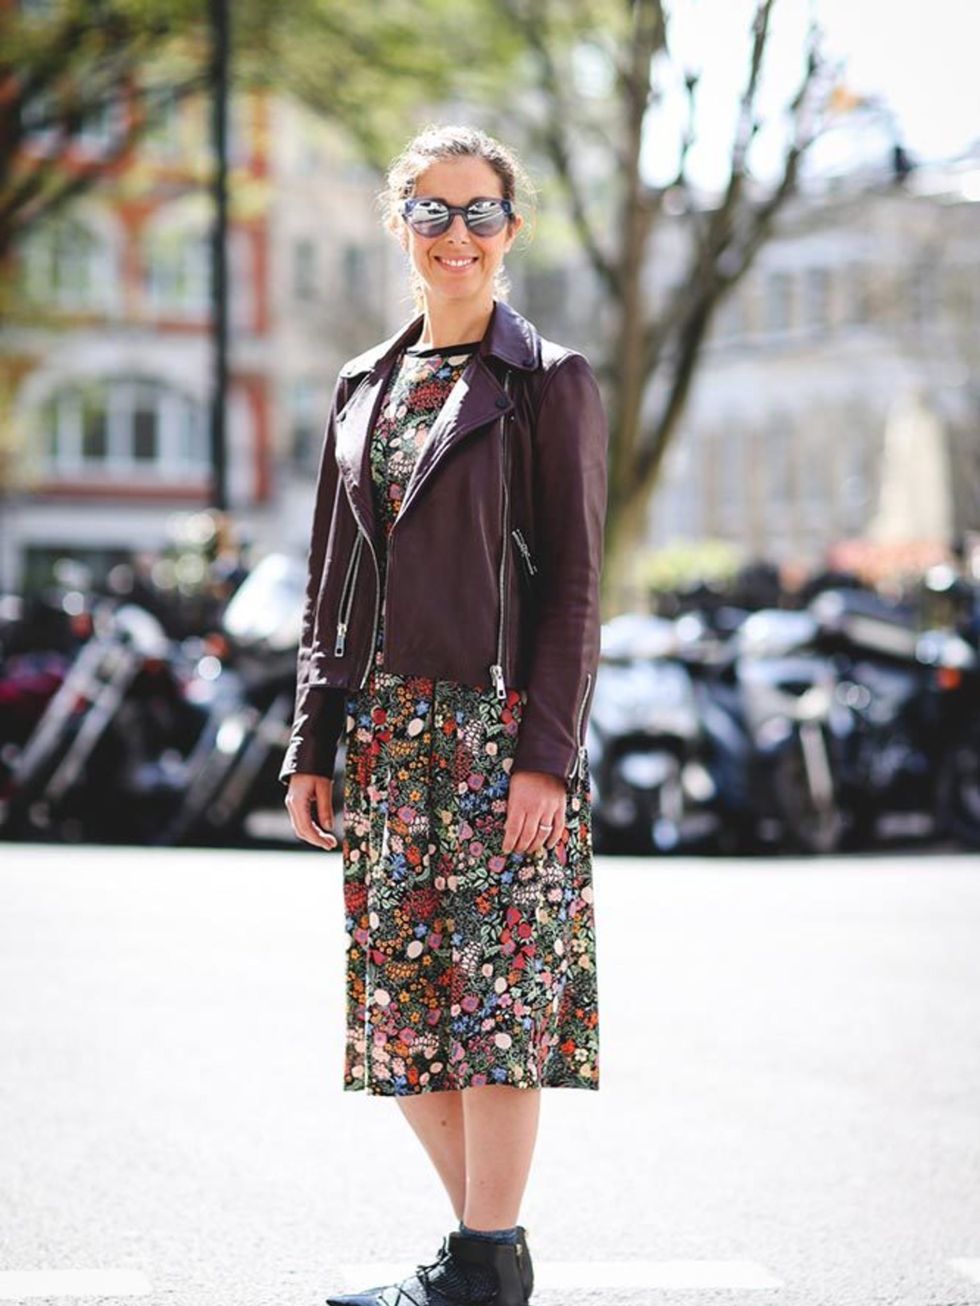 <p>Kirsty Dale, Executive Fashion & Beauty Director</p>

<p>Whistles jacket, Topshop top and dress, Jimmy Choo shoes, Bobbi Brown sunglasses</p>